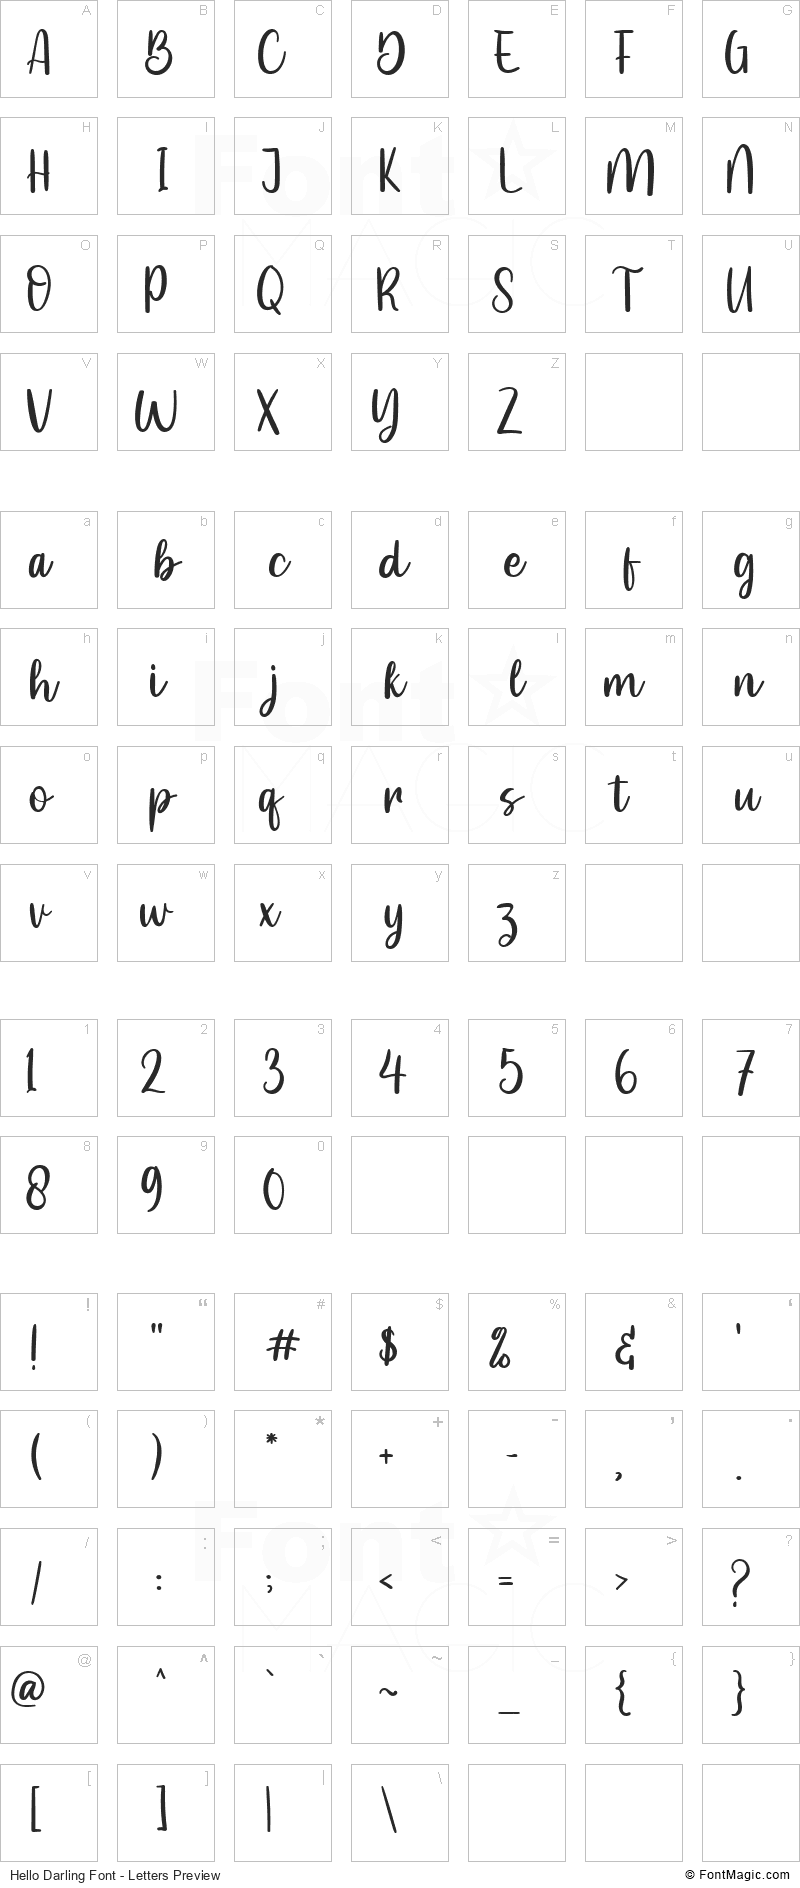 Hello Darling Font - All Latters Preview Chart